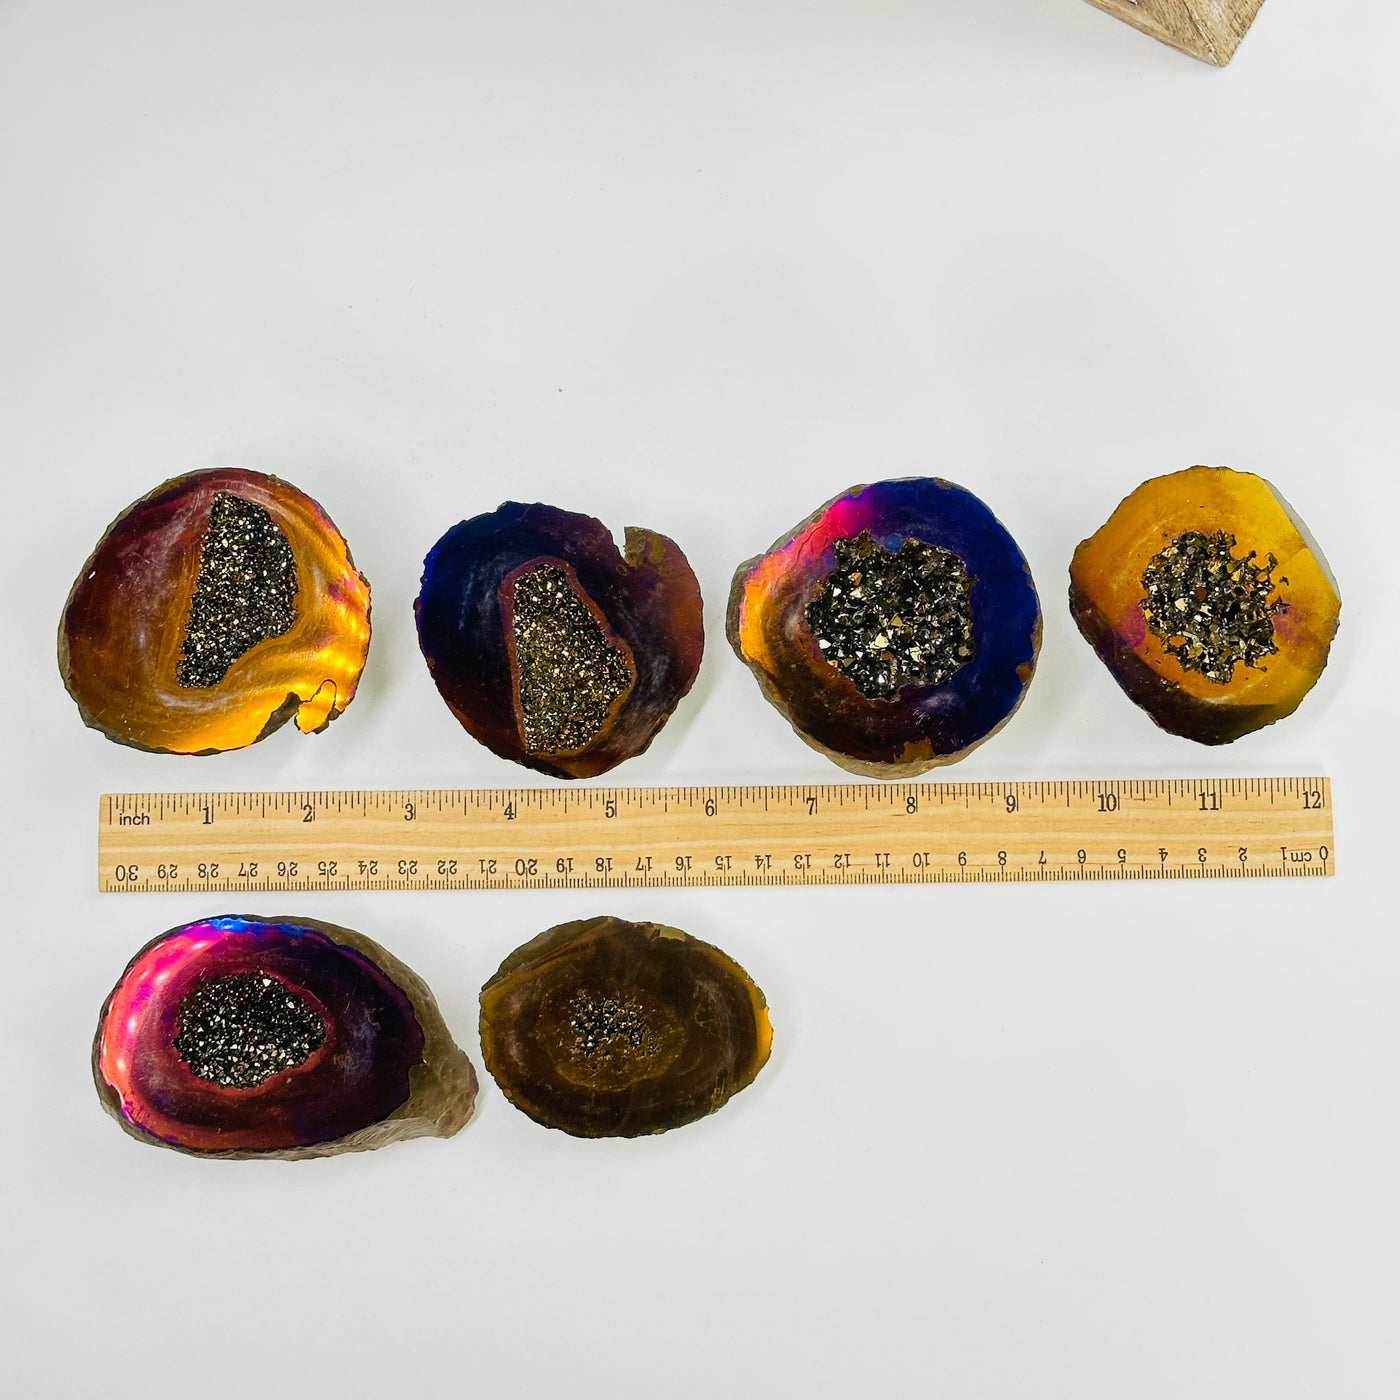 rainbow and gold titanium coated geode boxes next to a ruler for size reference